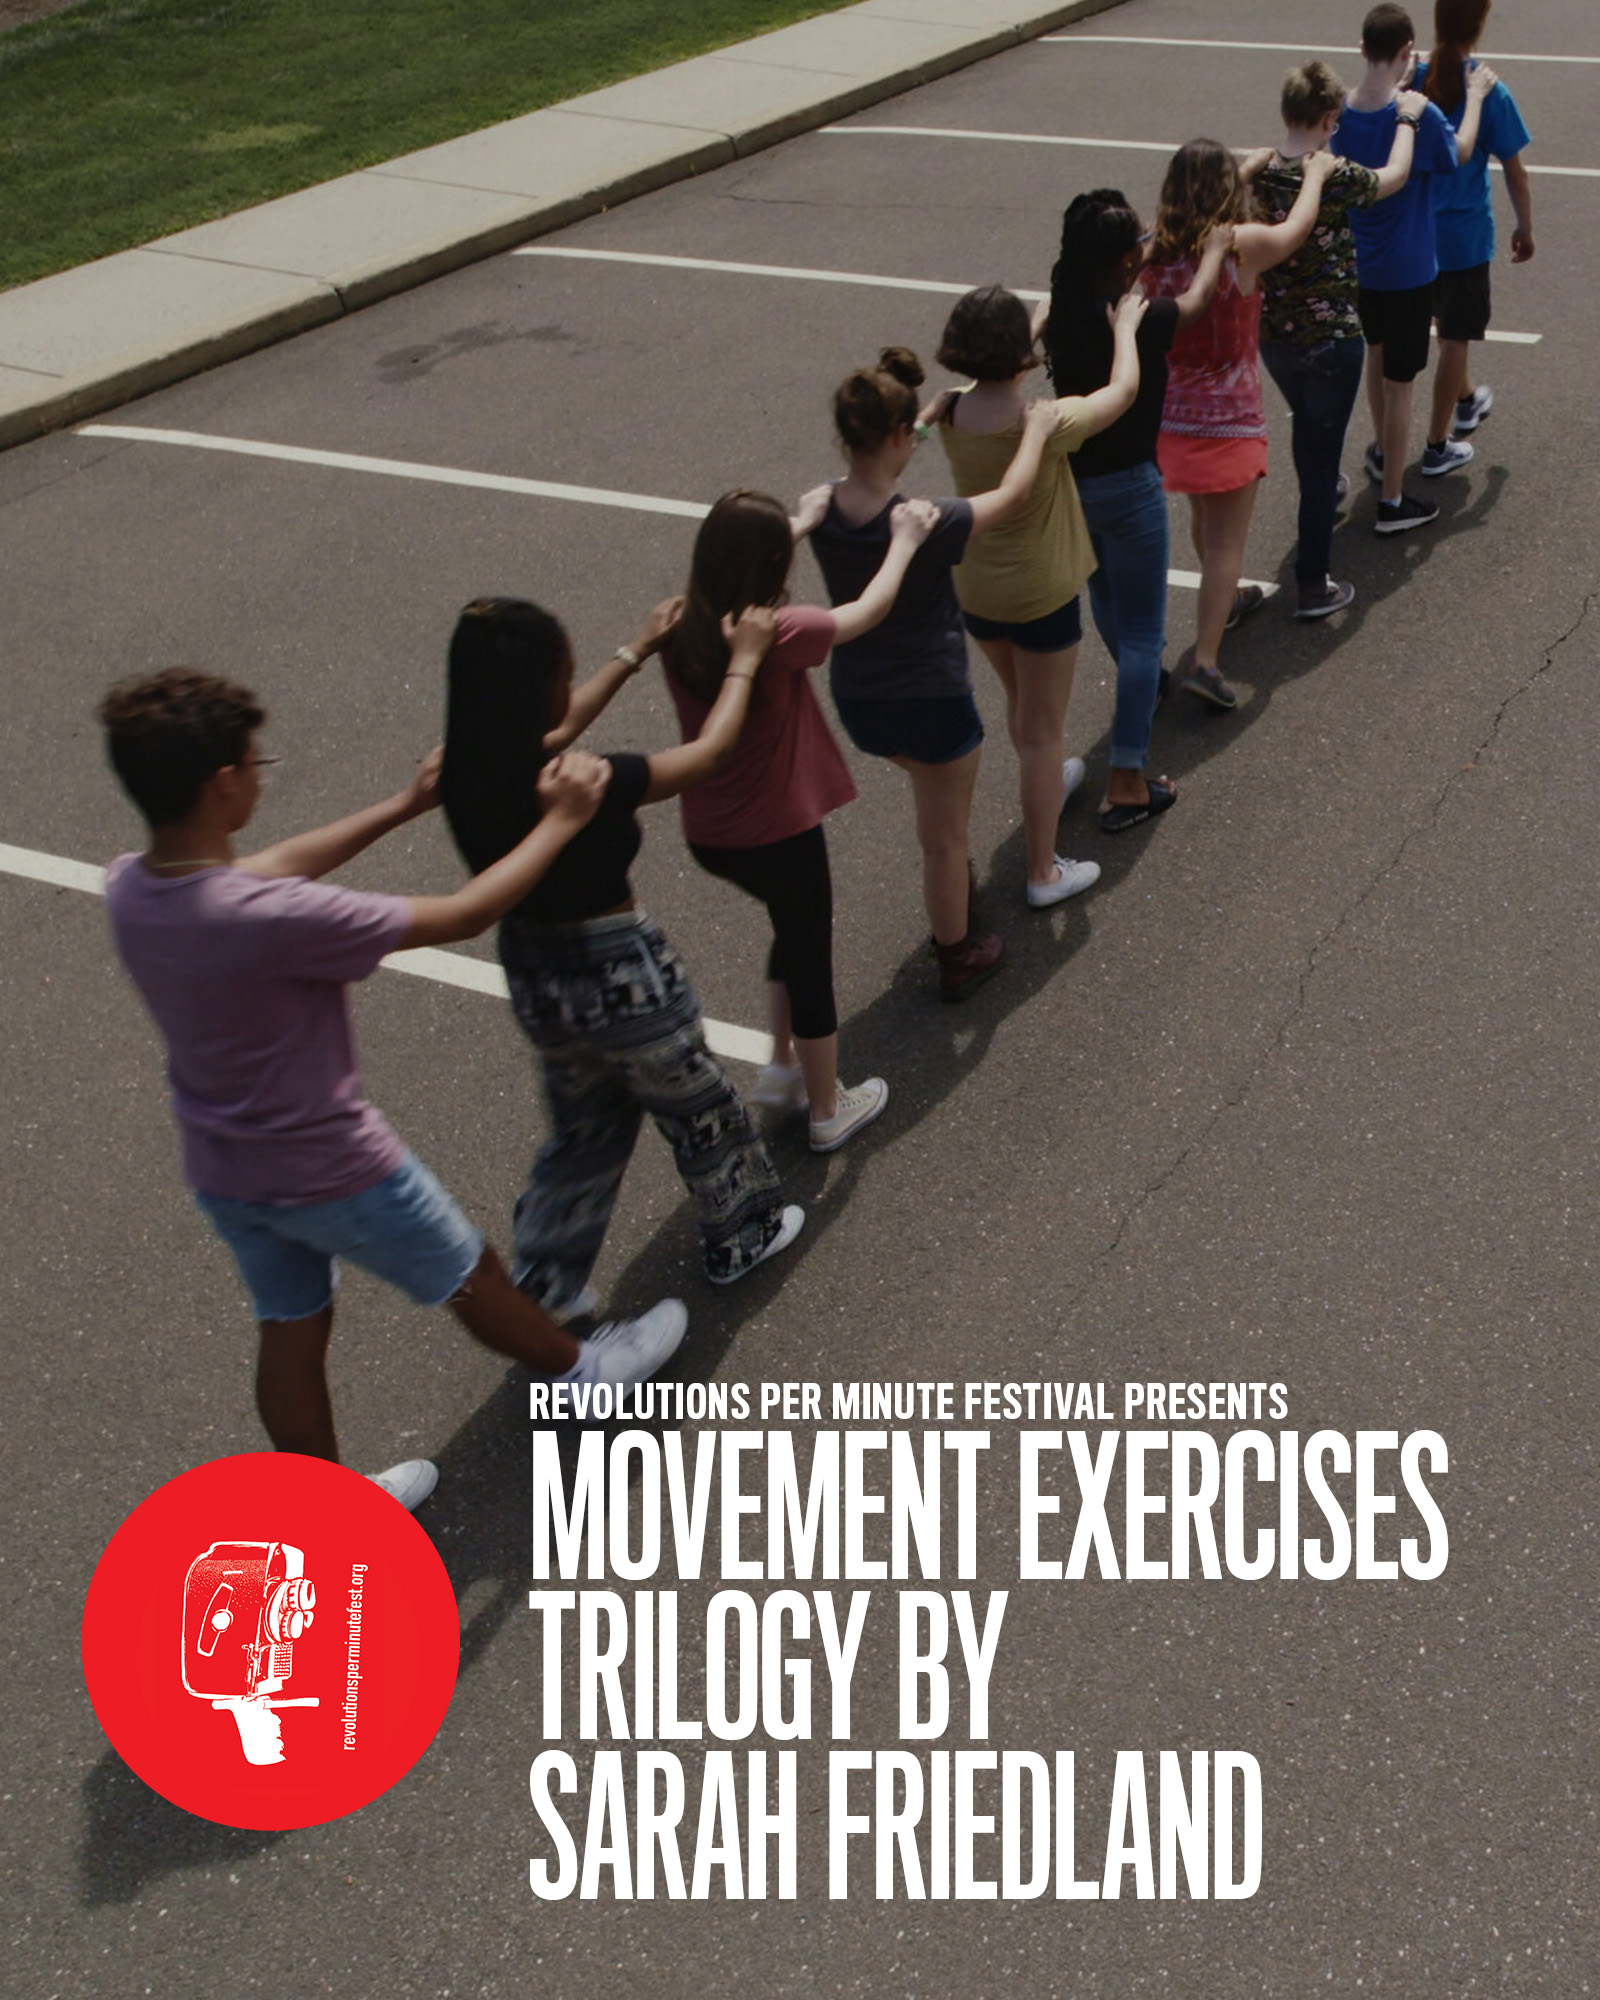 Poster for RPM Festival Presents: Movement Exercises Trilogy by Sarah Friedland